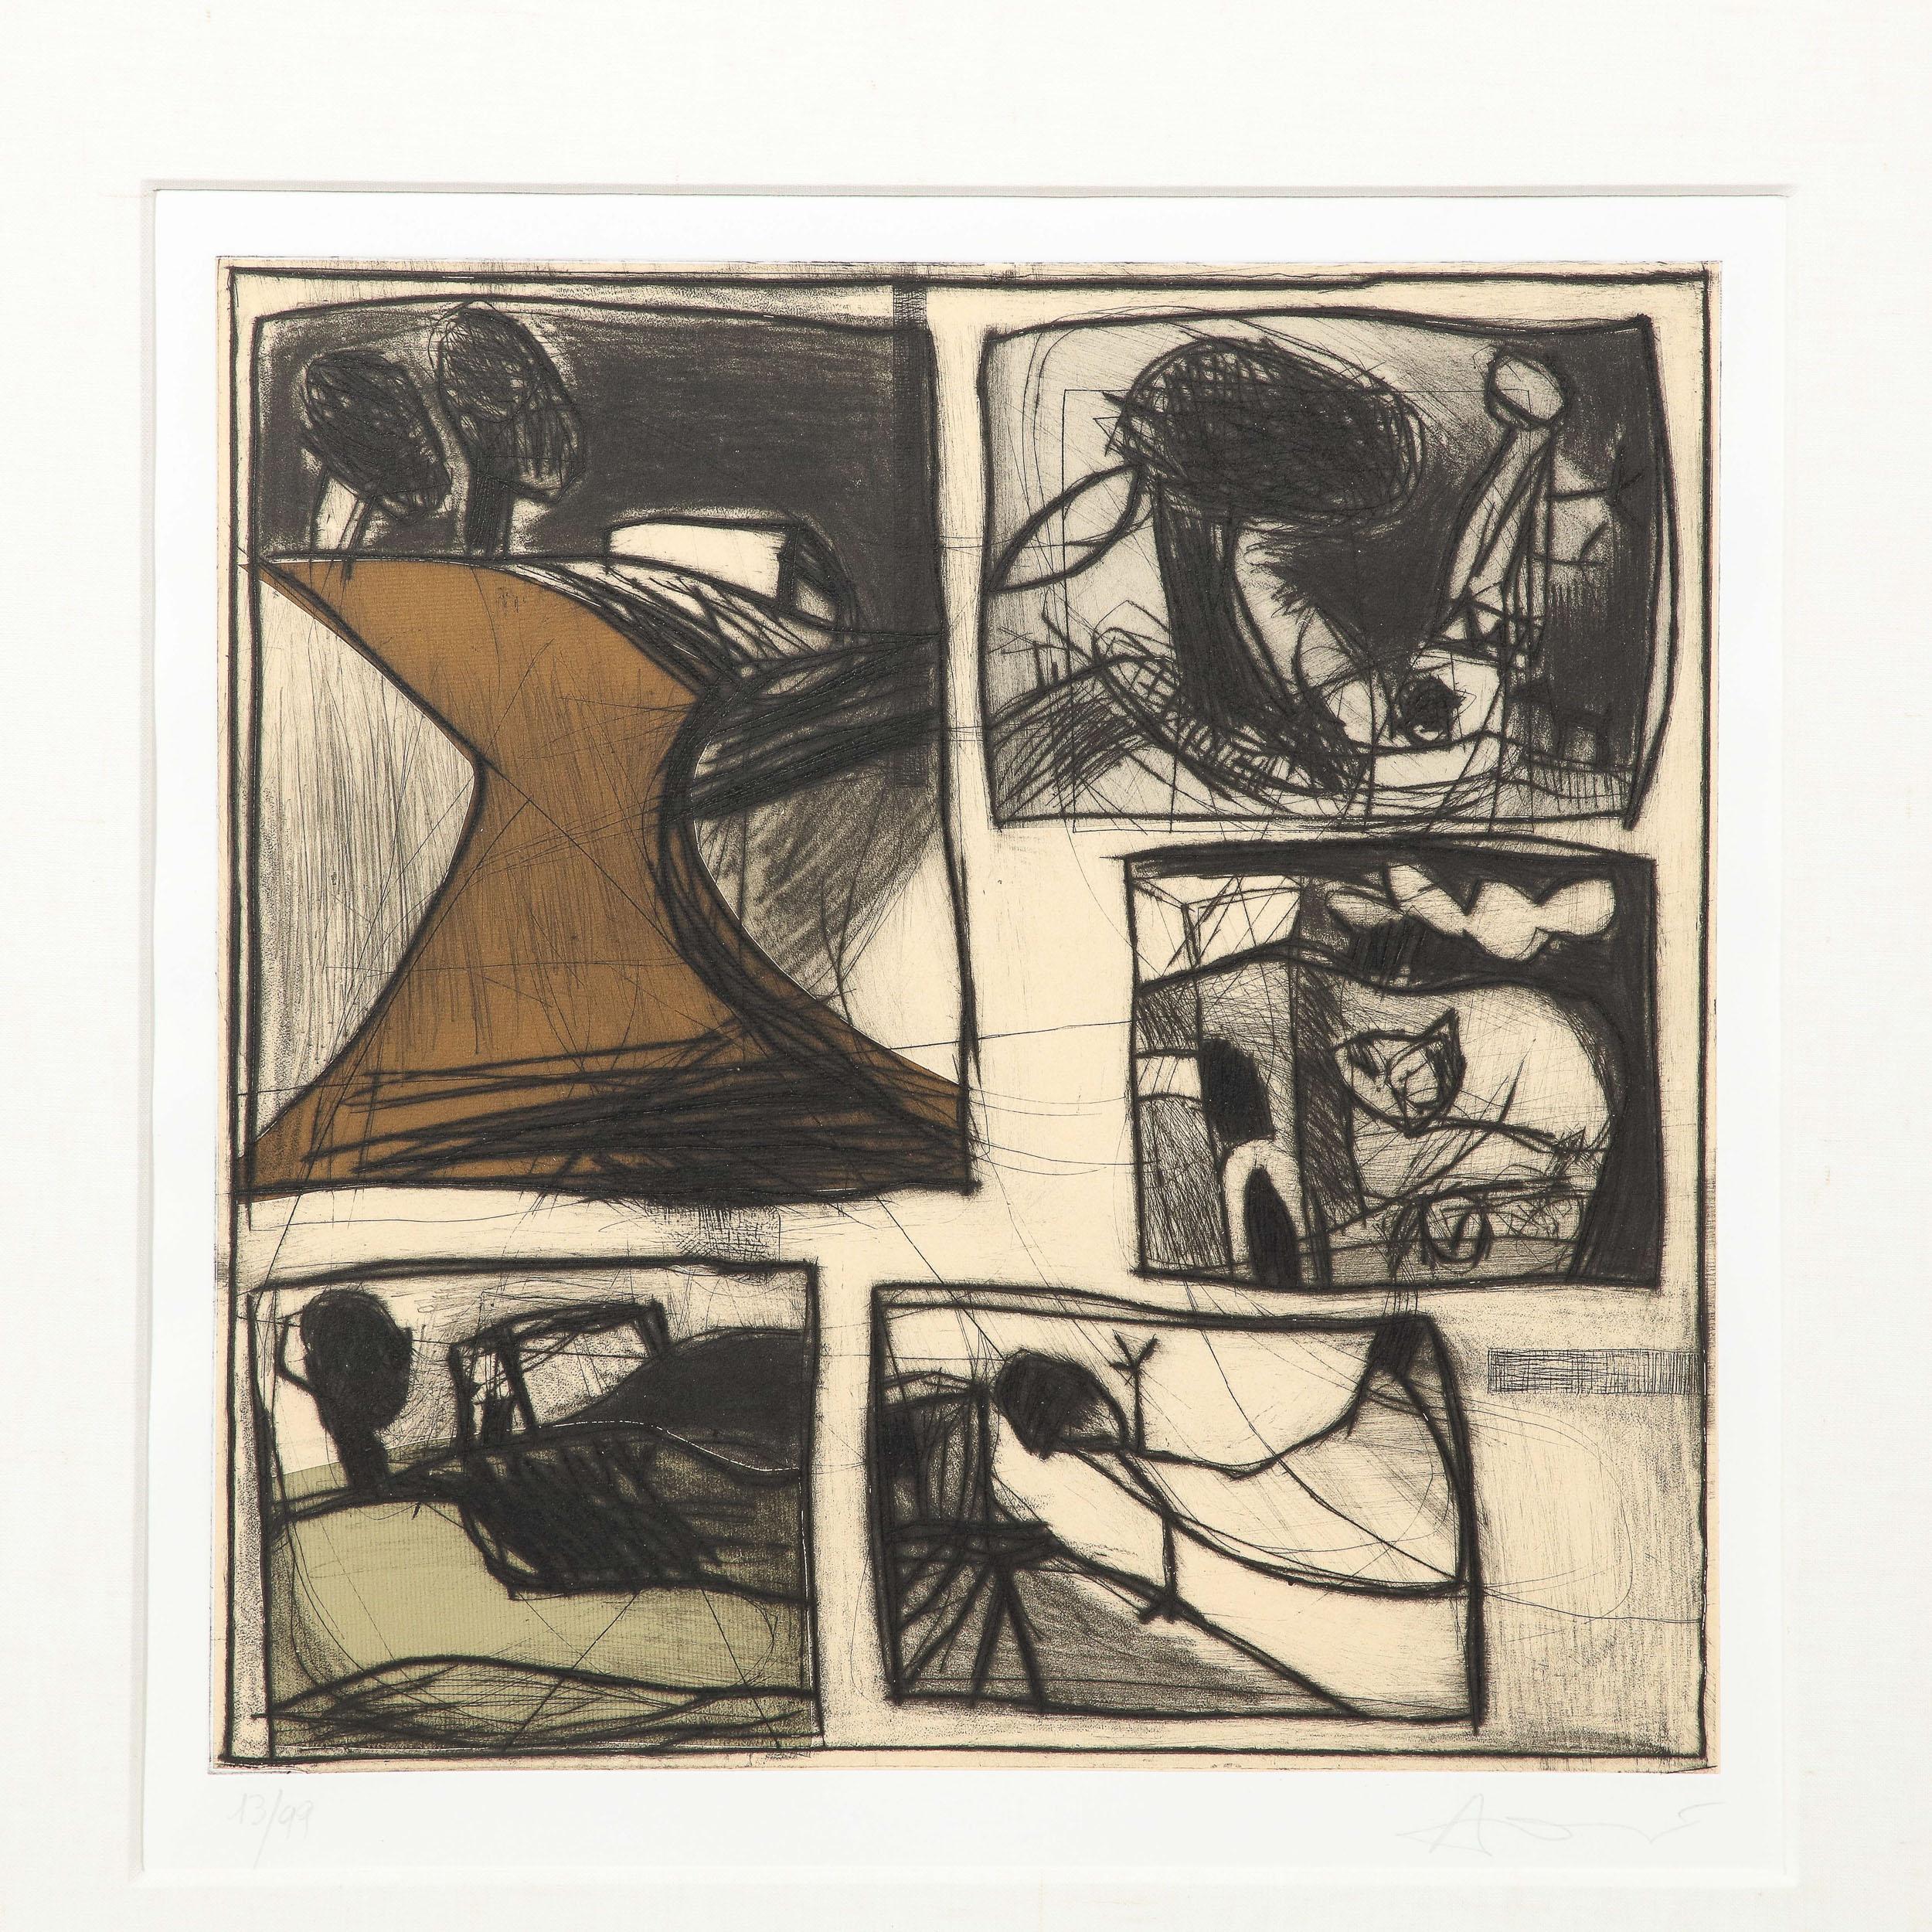 This sophisticated etching on paper was realized by the self-taught outsider artist Gianfranco Asveri (b. 1948), in the latter half of the 20th Century. Rendered in an Art Brut style, the composition offers a cluster of four rectangular planes- like